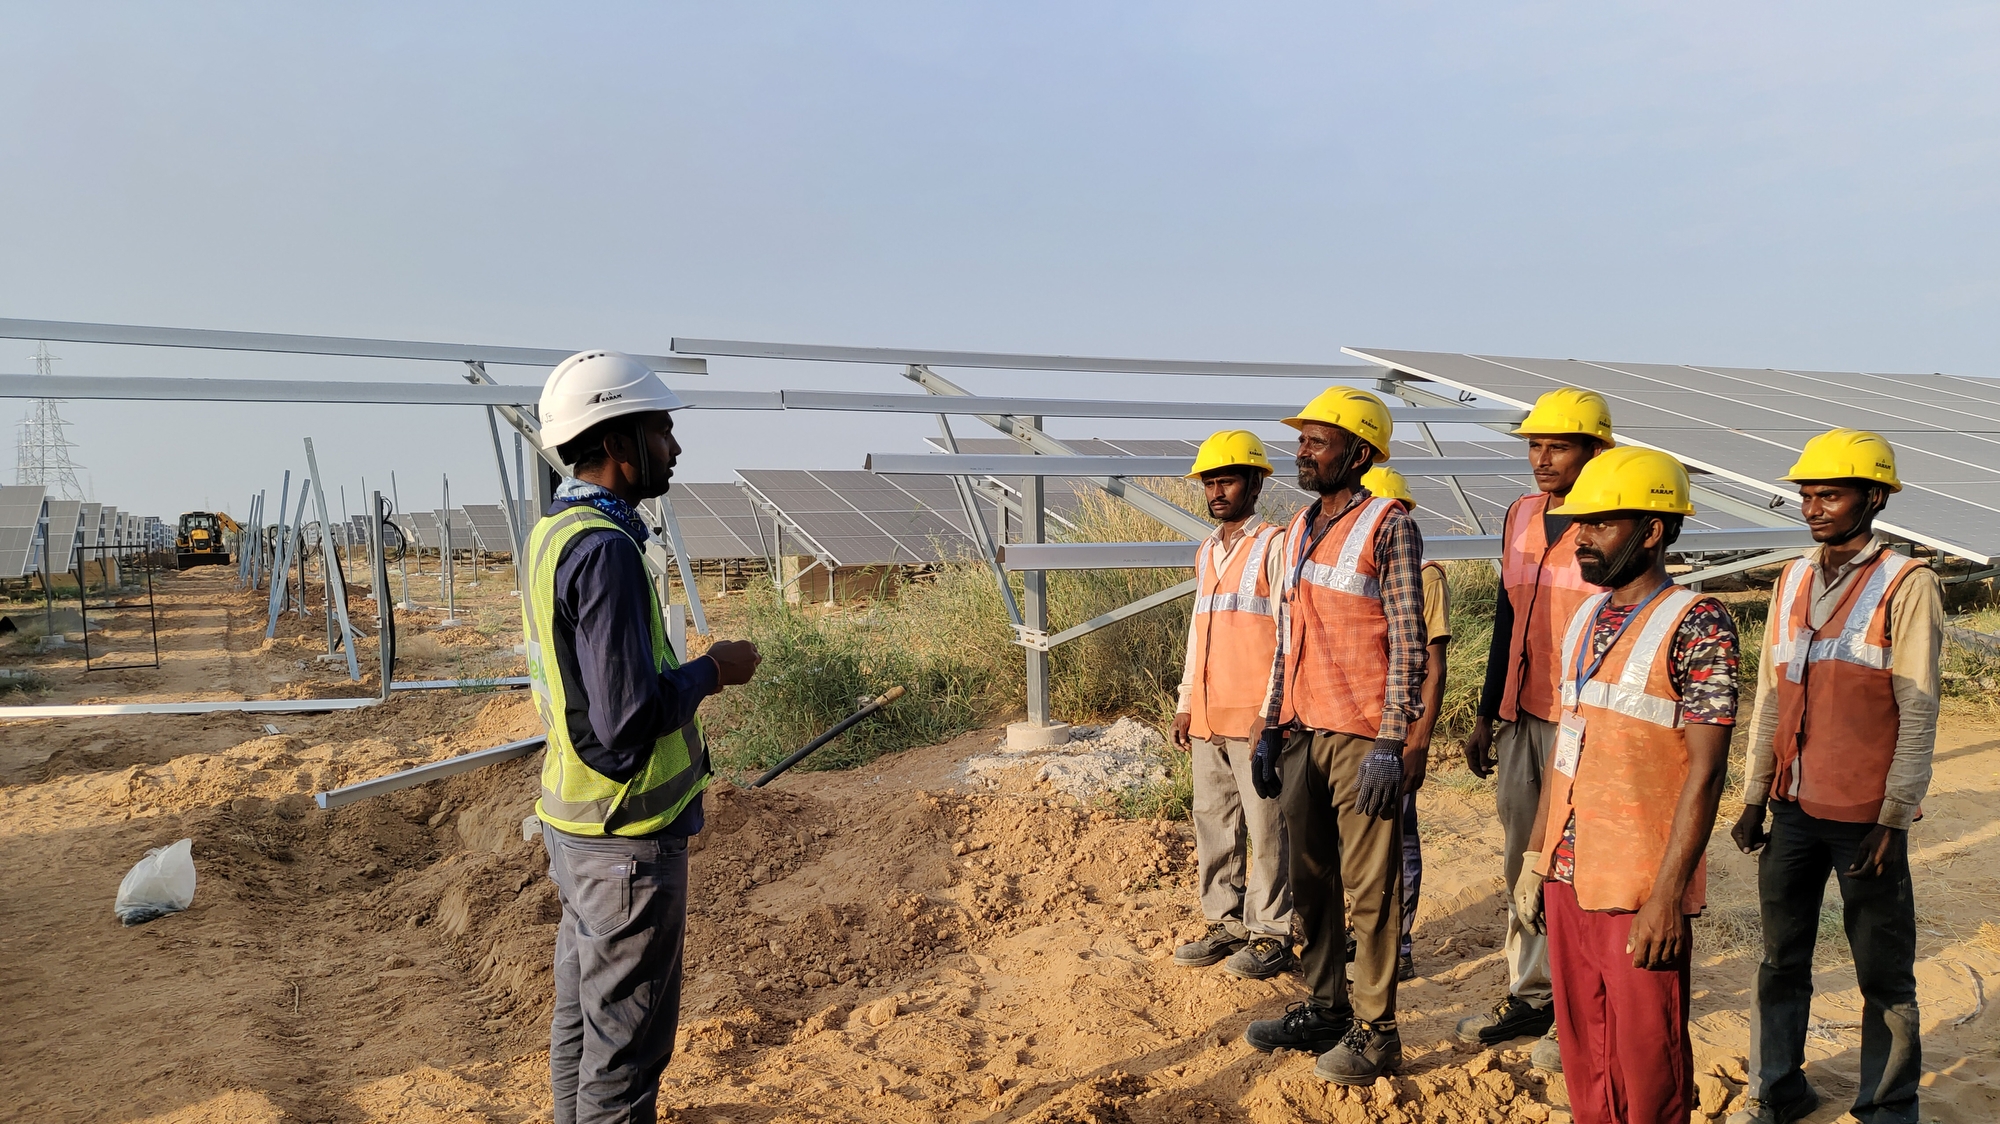 An image of a group of employees in India having a conversation in a solar farm. They are all dressed in vests and helmets.